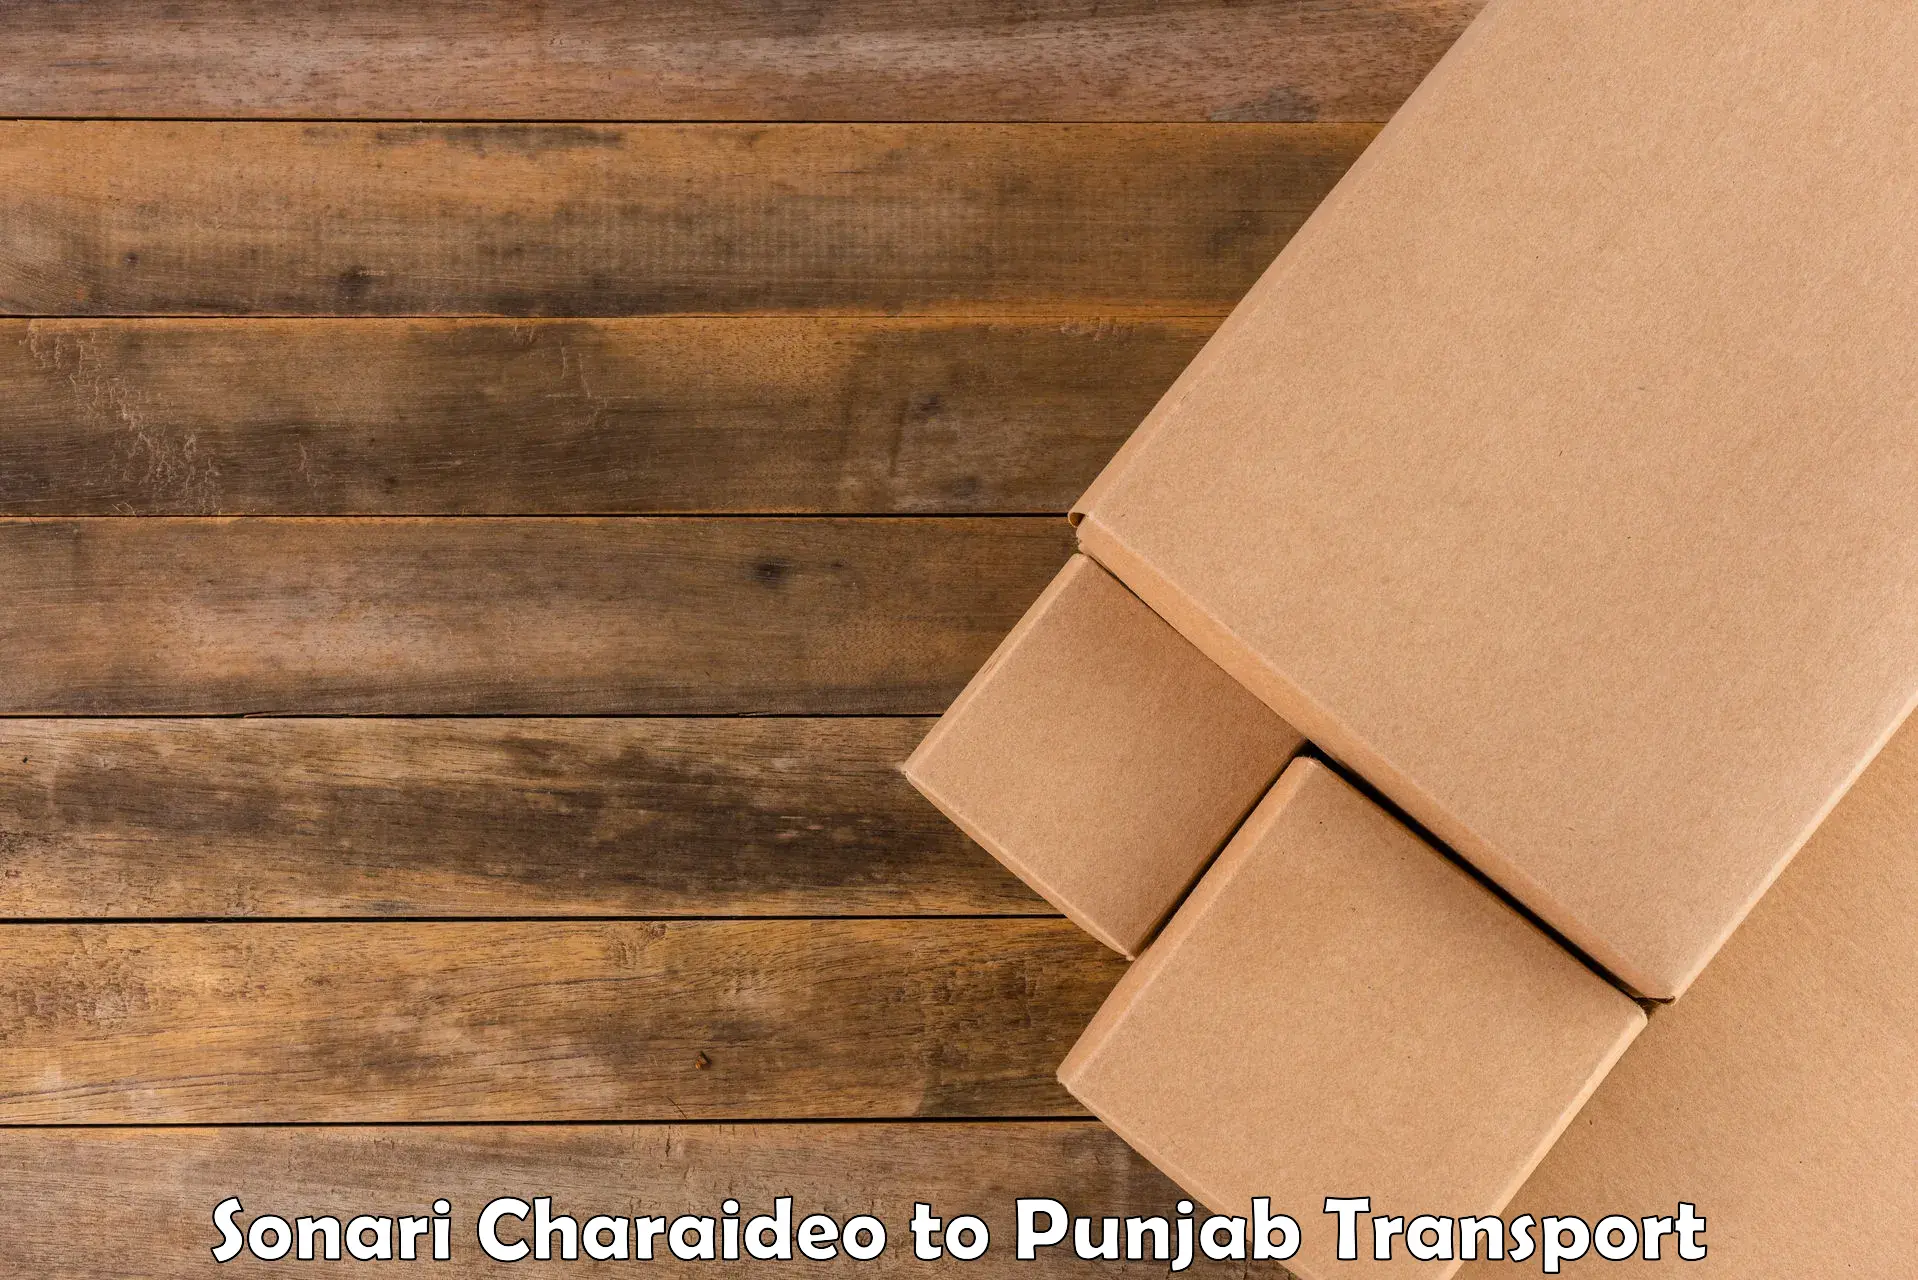 Two wheeler transport services Sonari Charaideo to Mohali